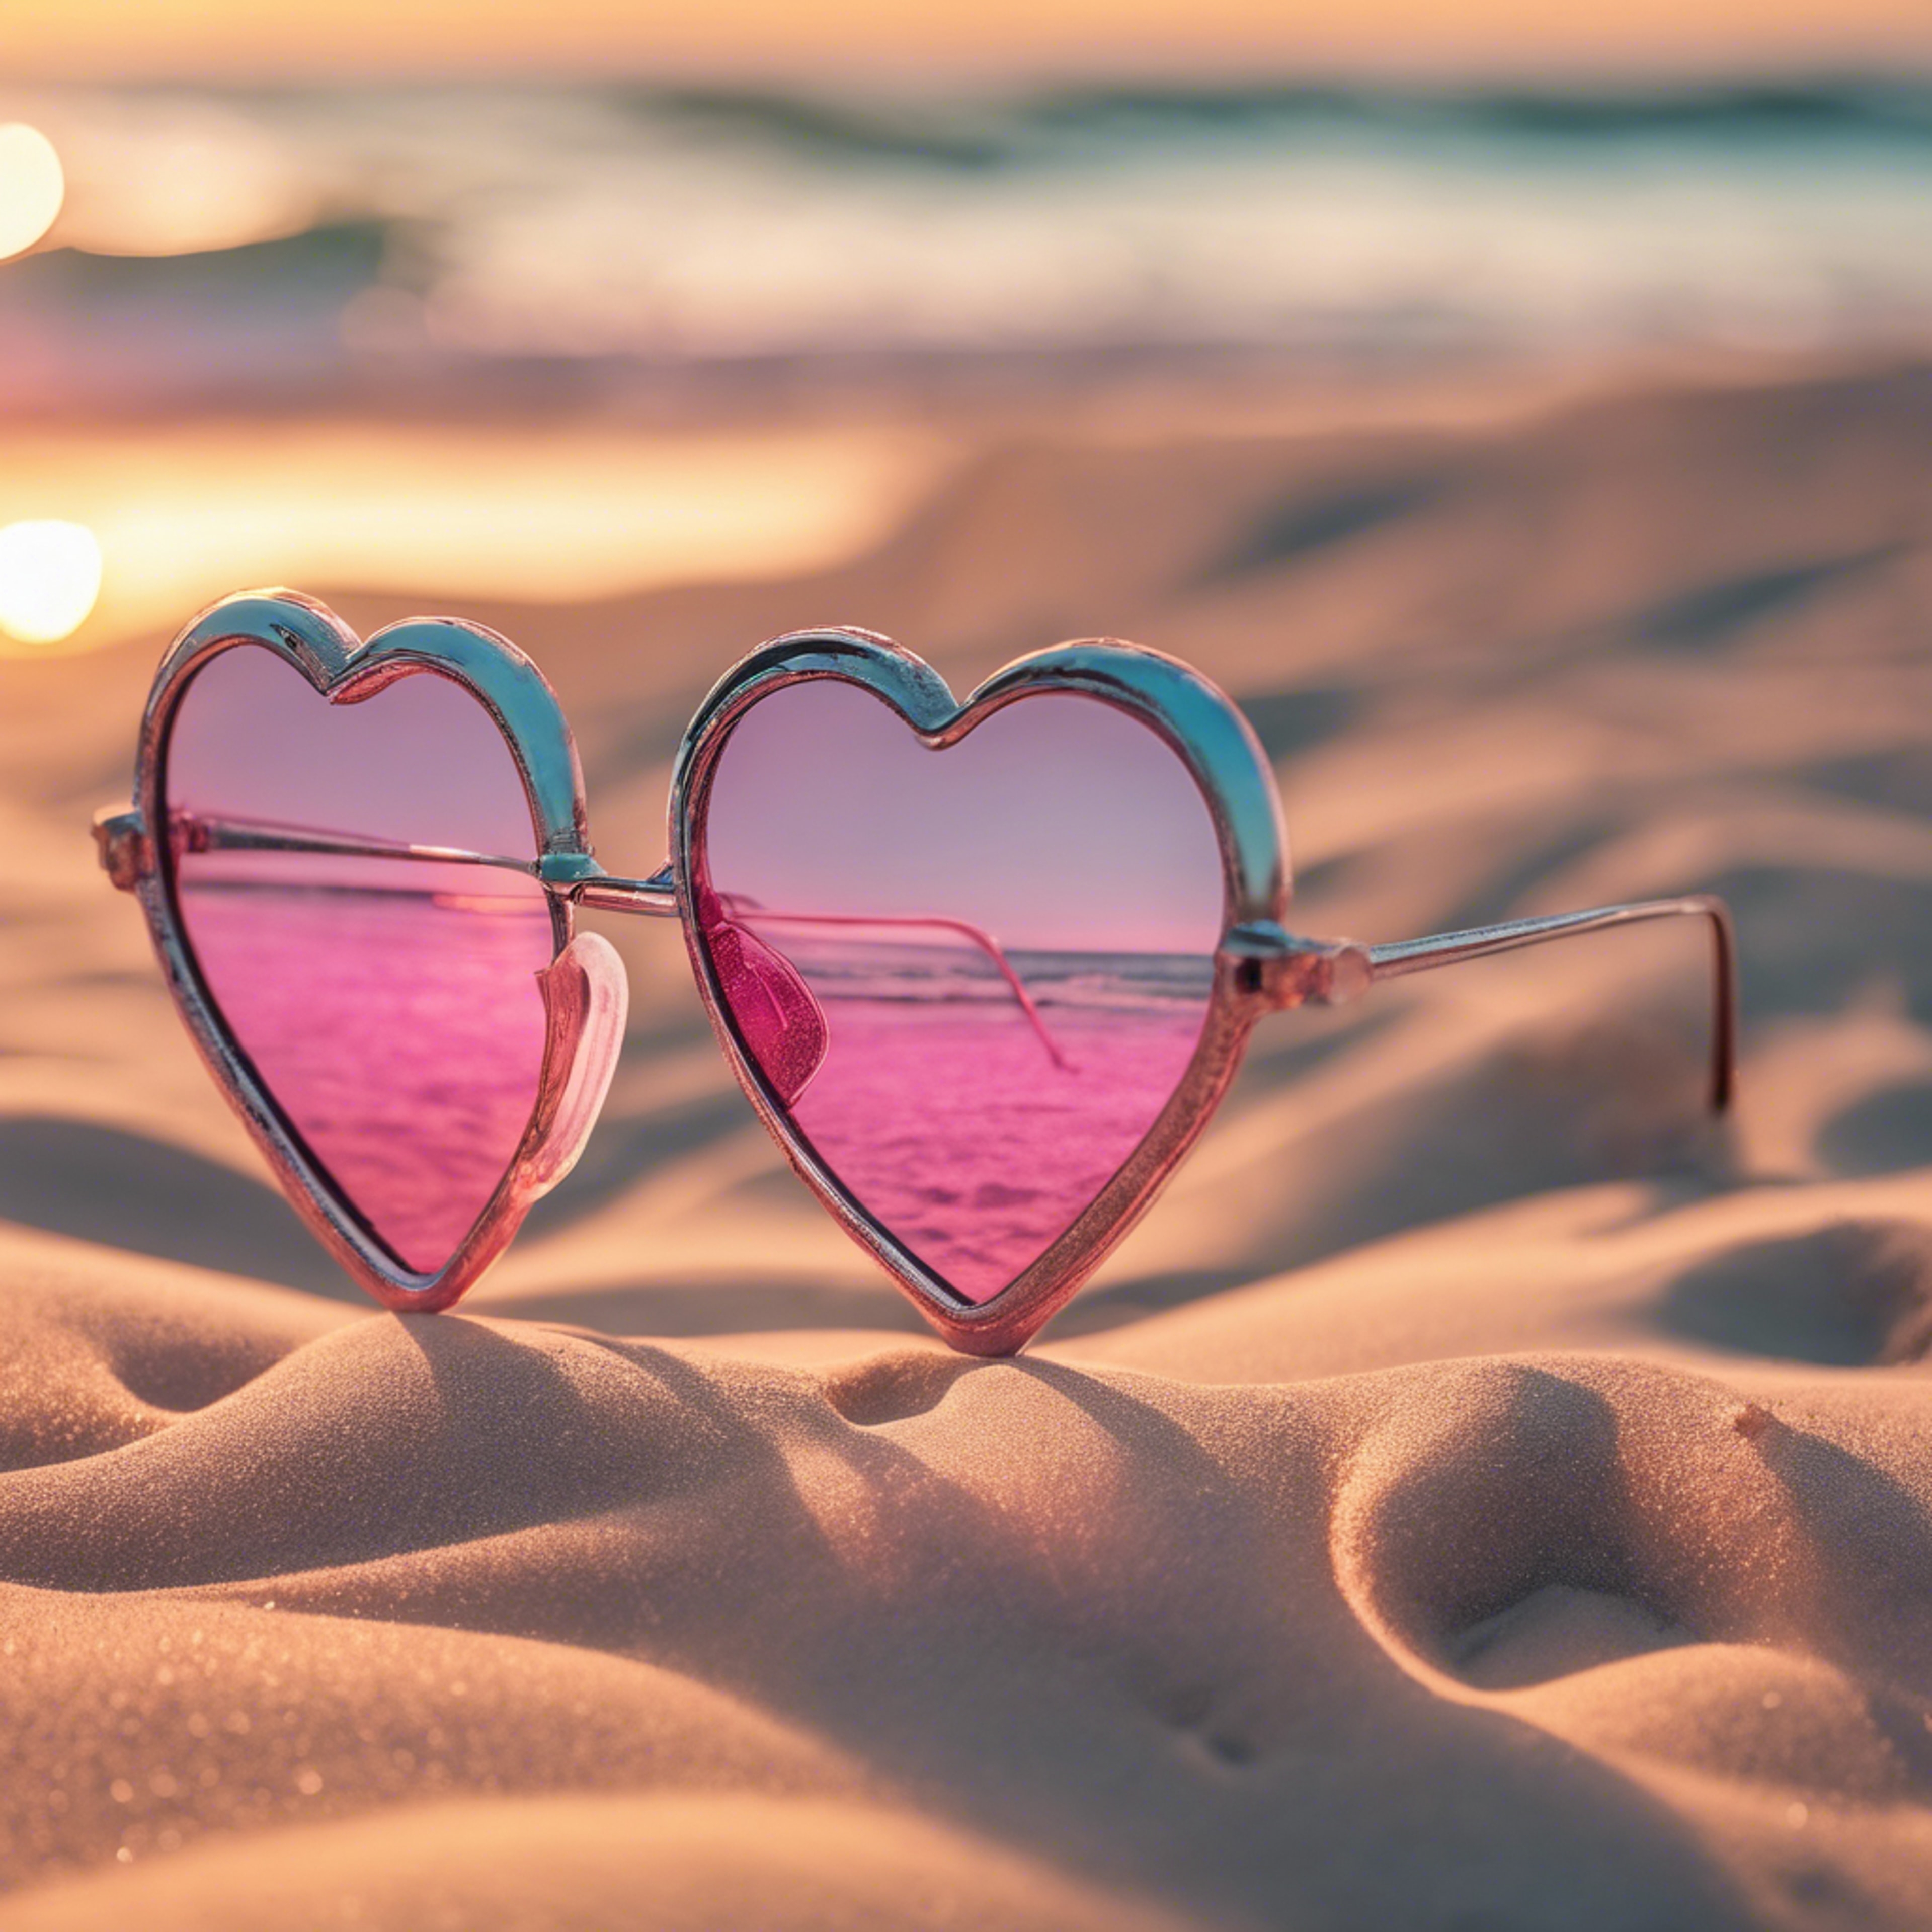 Pink heart-shaped eyeglasses reflecting the sunset at a sandy beach.壁紙[efe72a03955a4cafb74c]